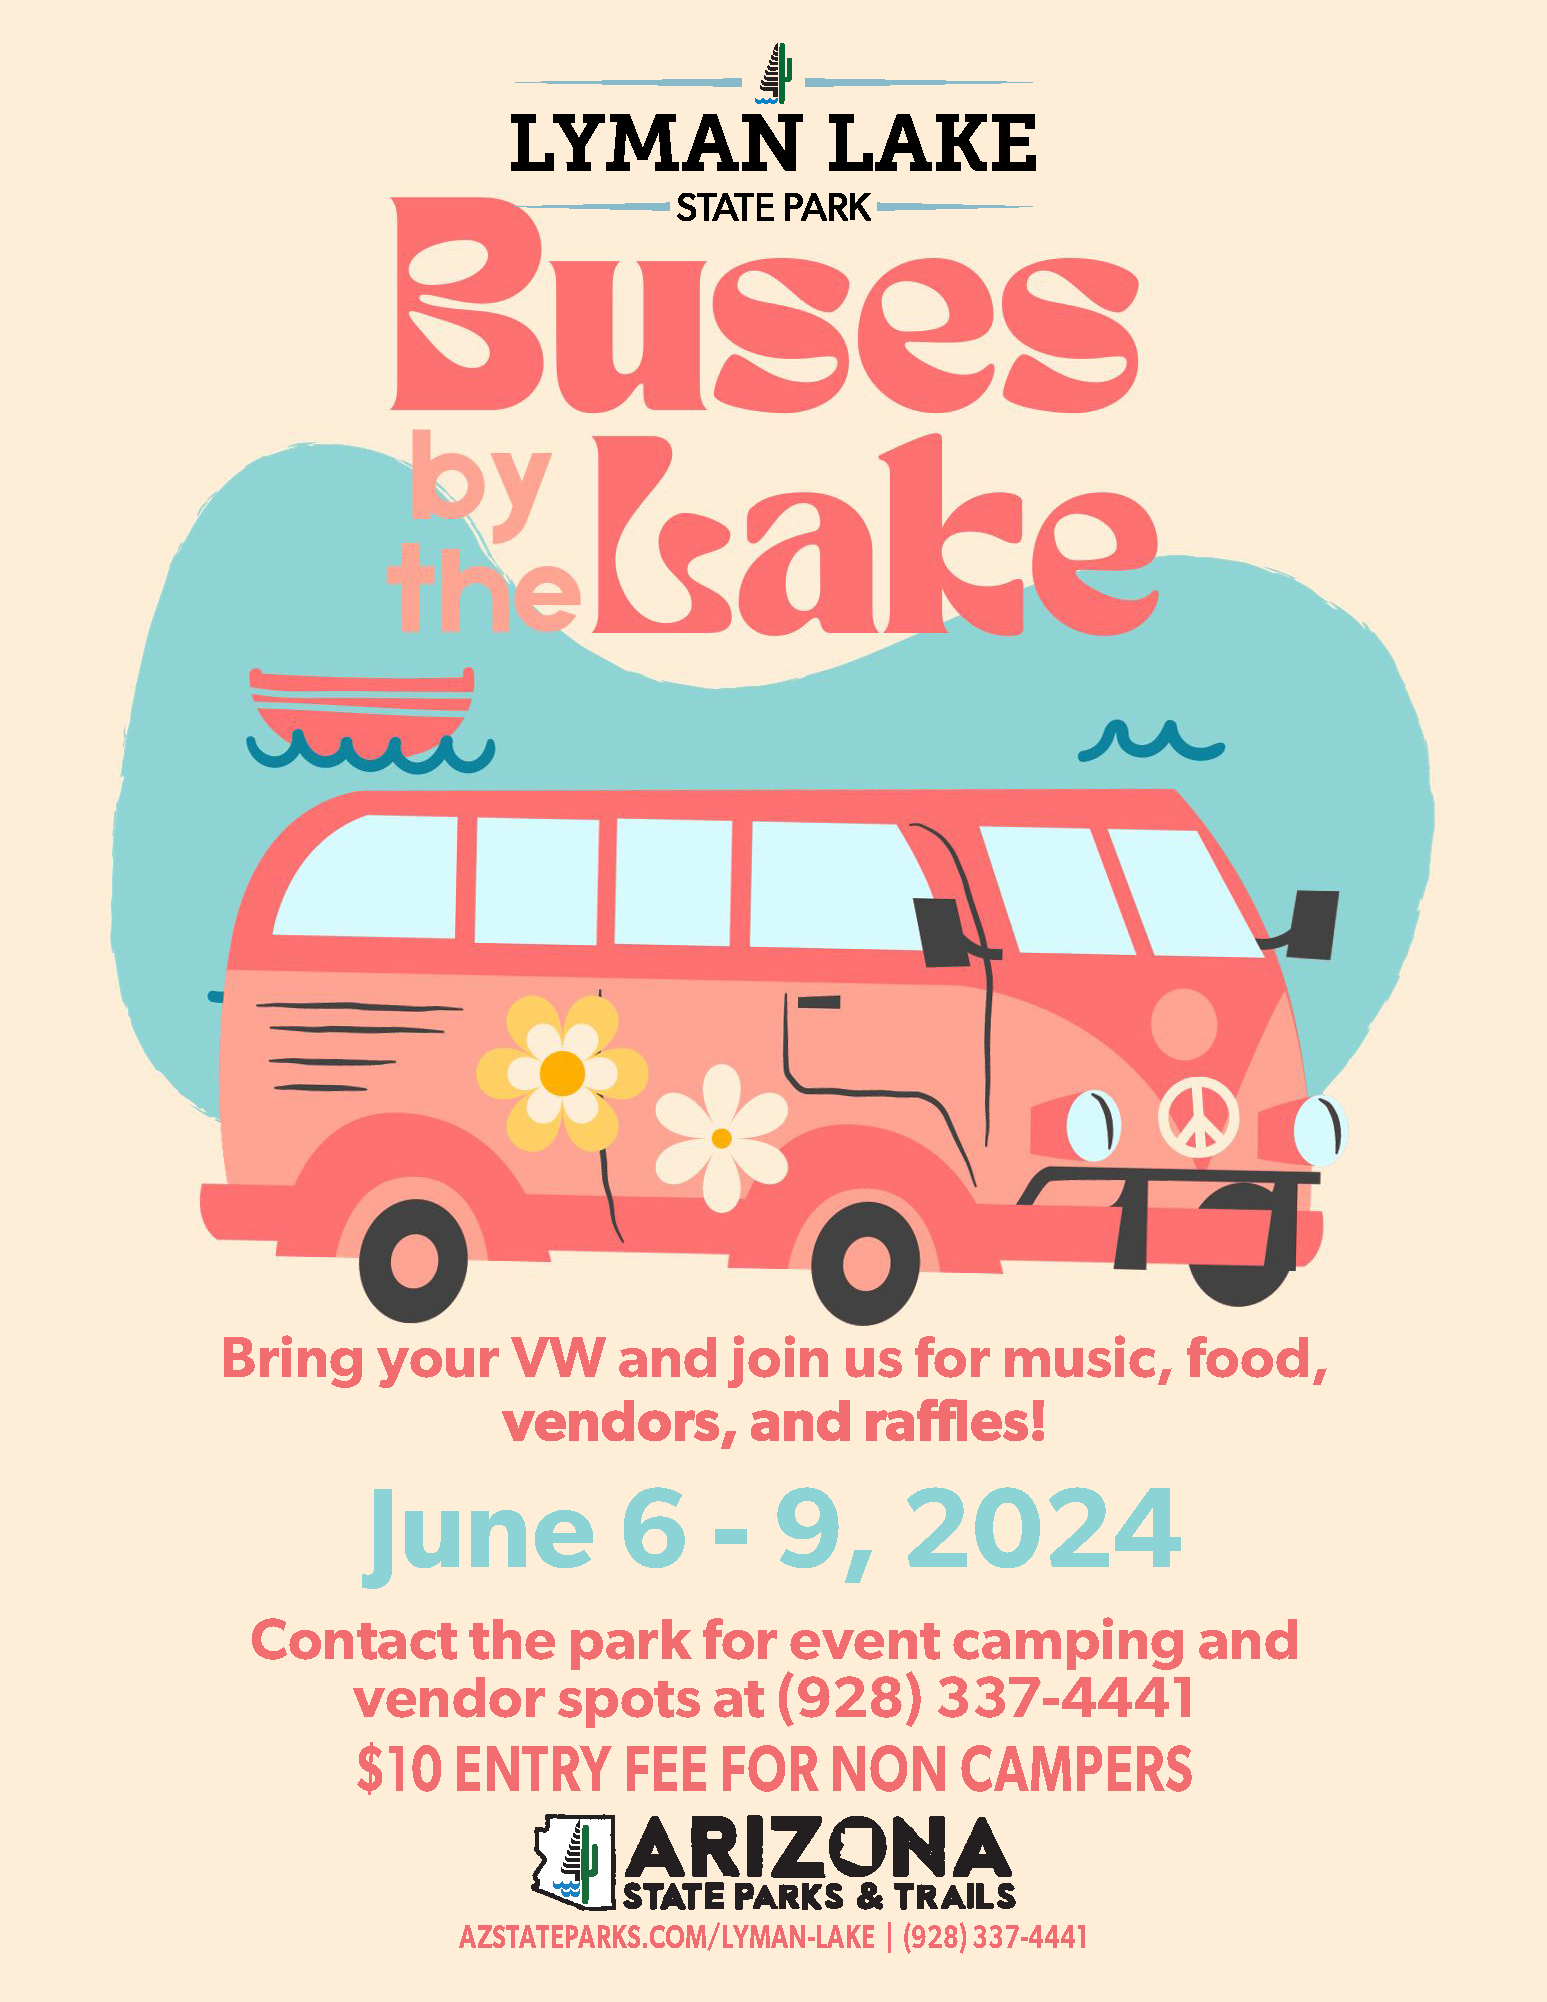 Flyer with a graphic of a pink VW bus with flowers on the side in front of an illustrated lake. Text on the flyer reads 